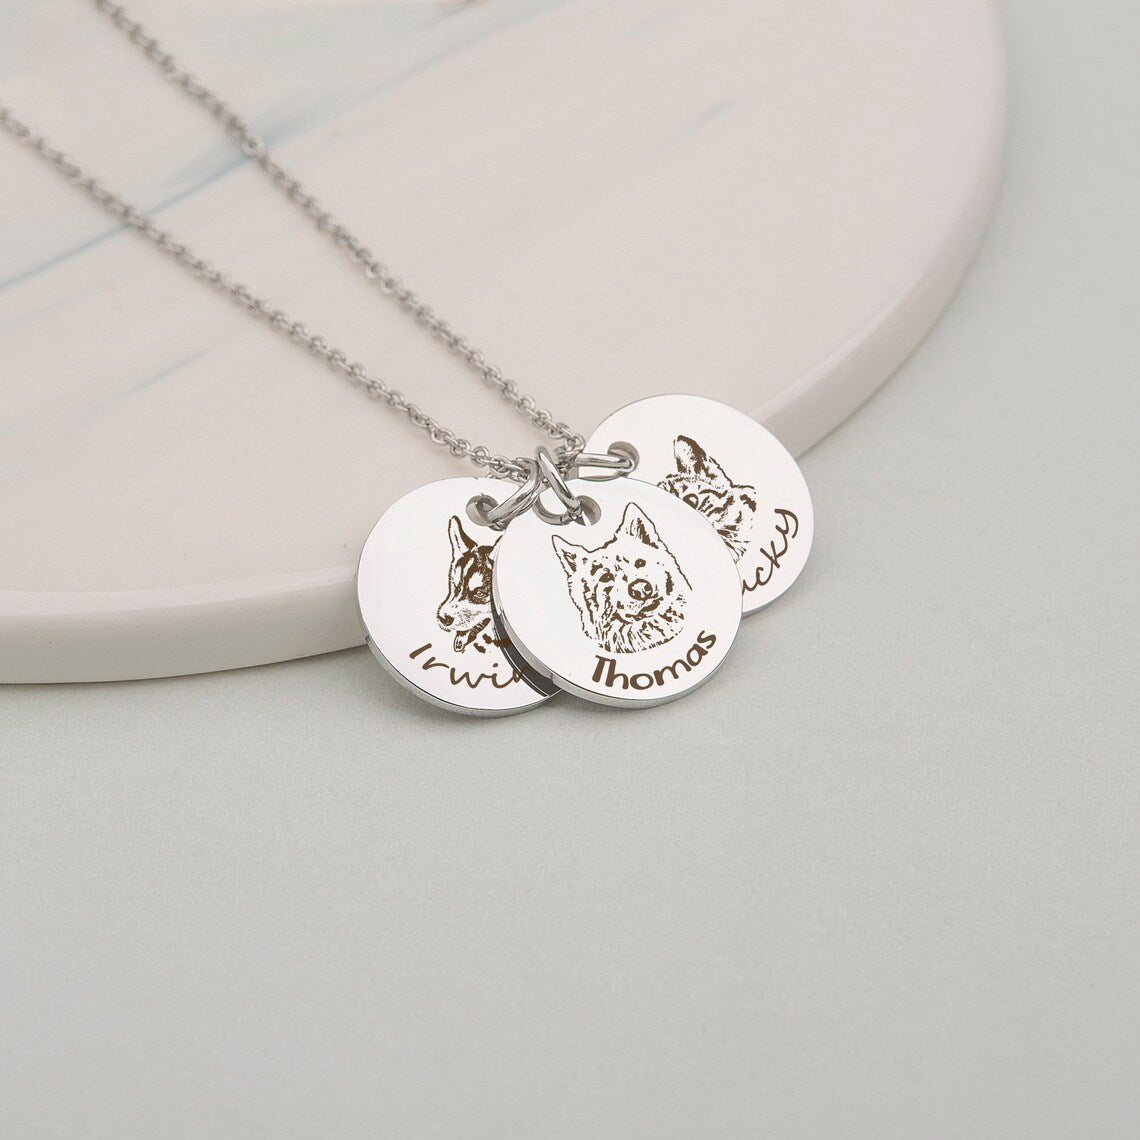 Christmas gifts for dog lovers: personalized dog portrait necklace